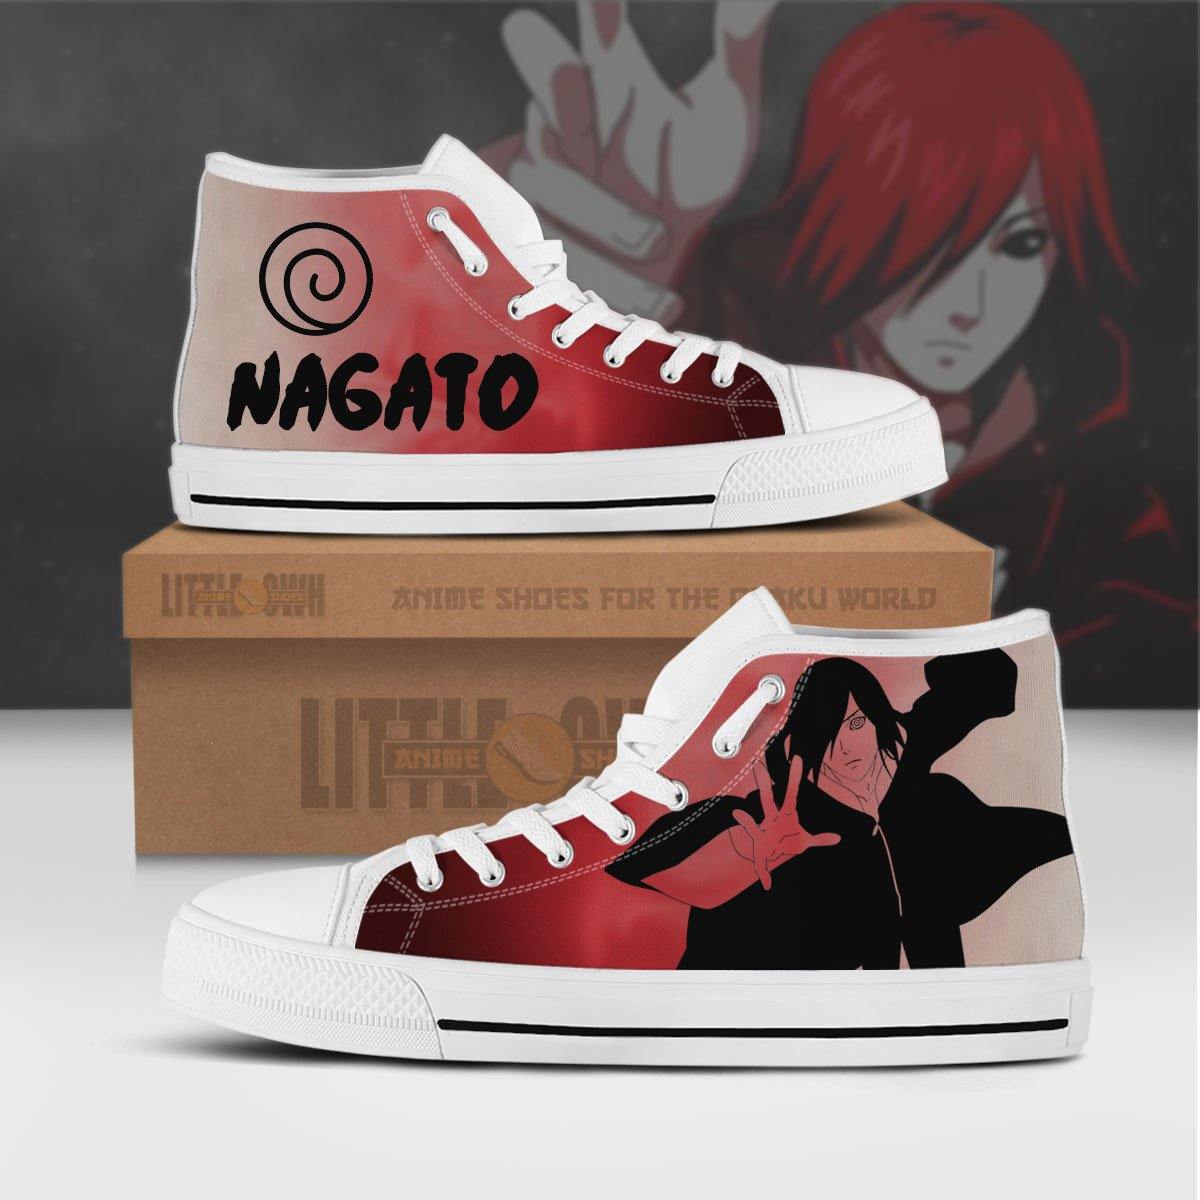 Nagato Naruto Anime Custom All Star High Top Sneakers Canvas Shoes